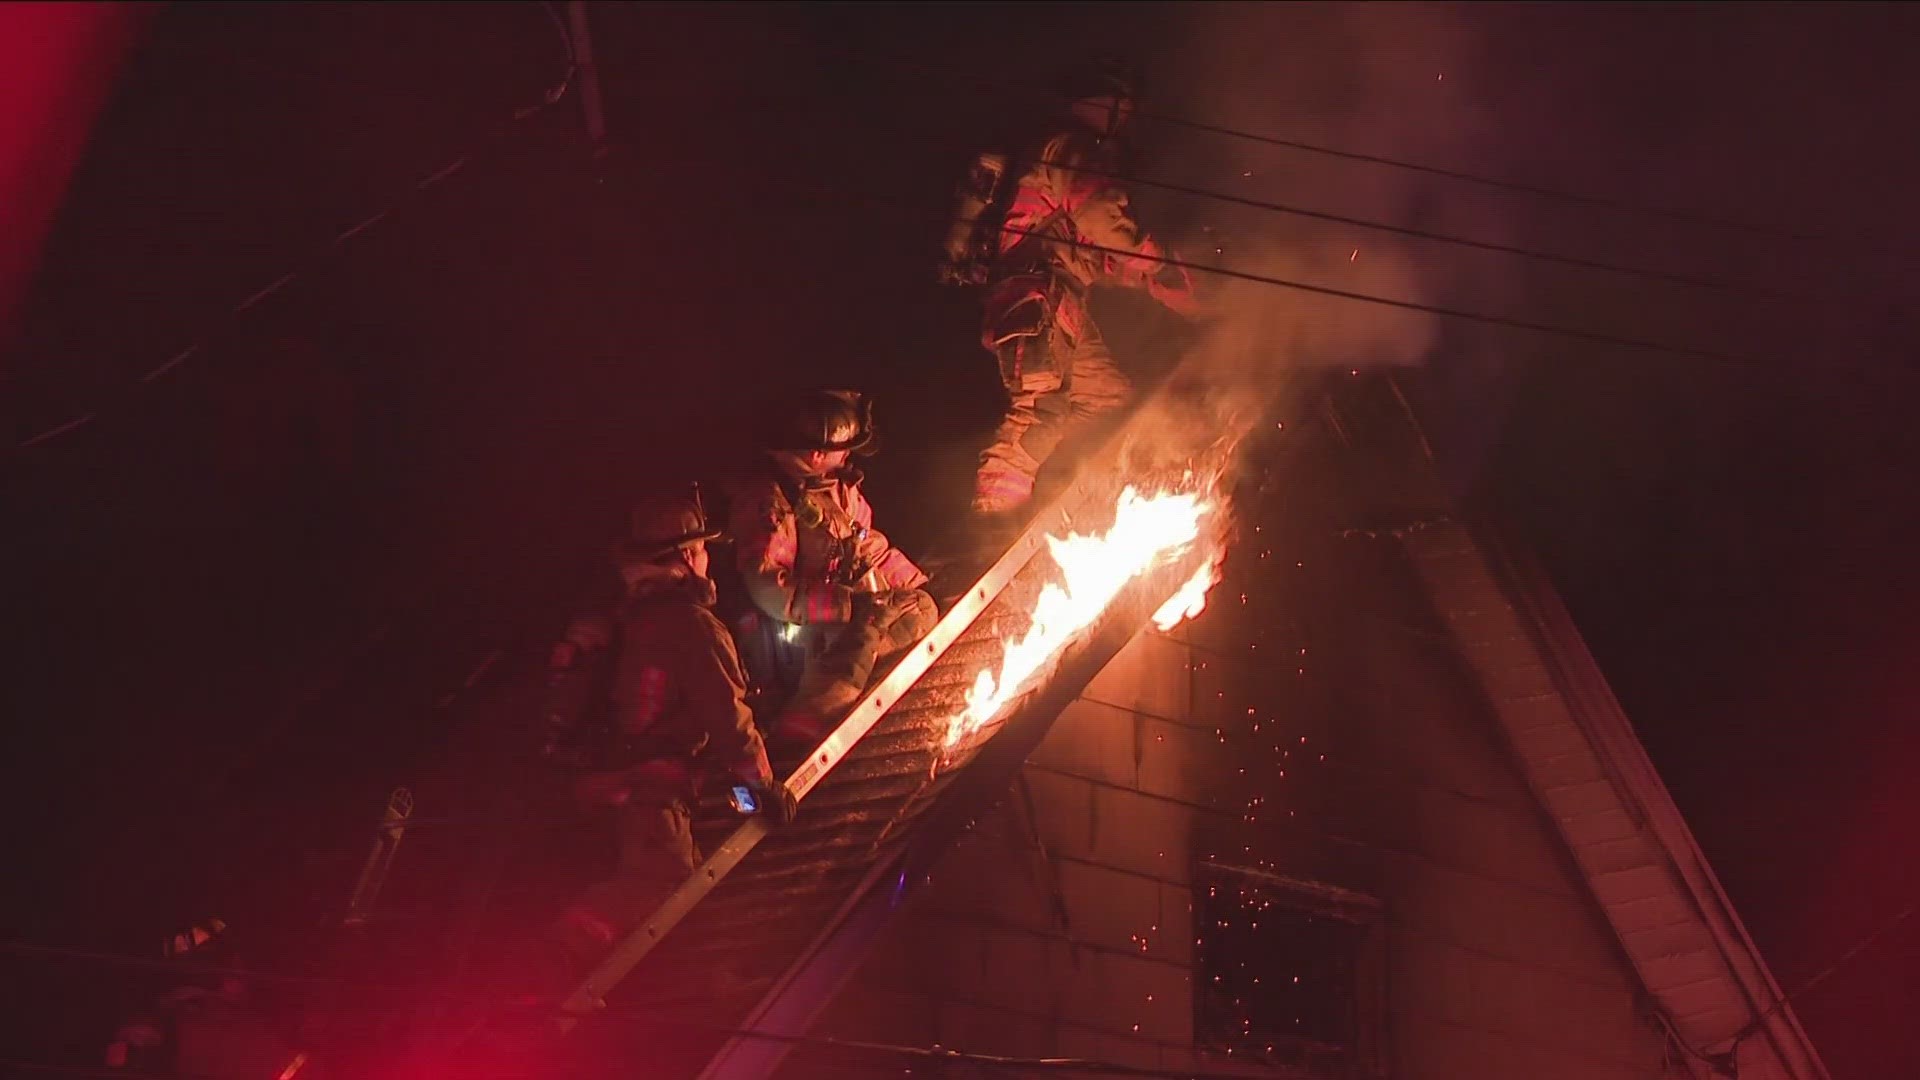 Around 2:30 this morning firefighters were actively trying to put out flames at a home on Sears Street.